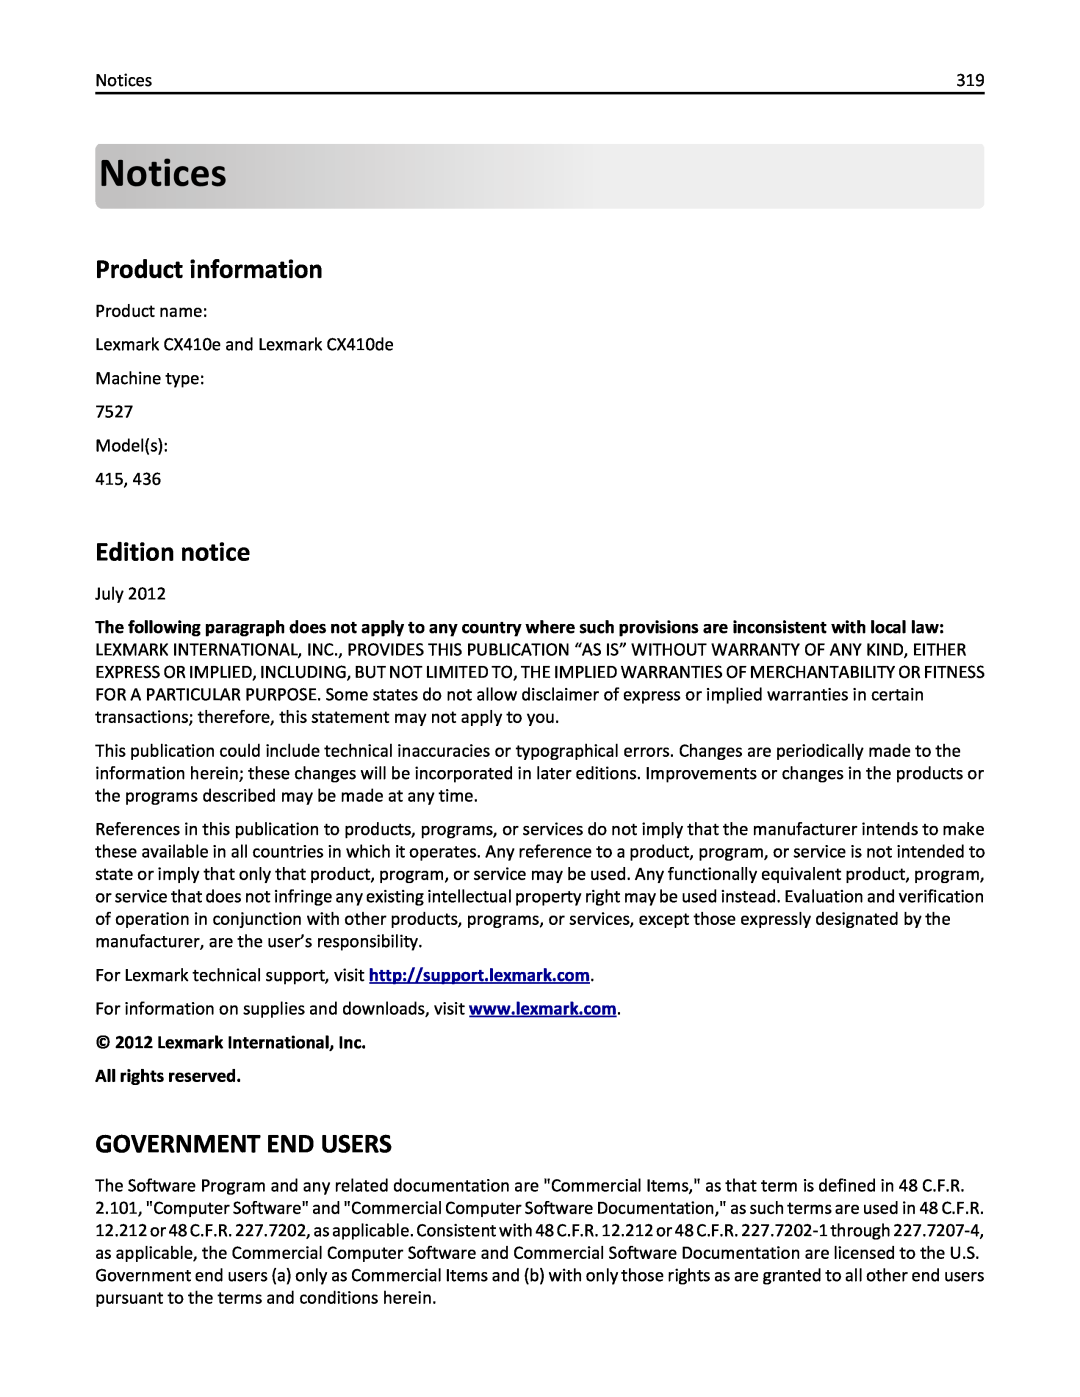 Lexmark 436 manual Notices, Product information, Edition notice, Government End Users 